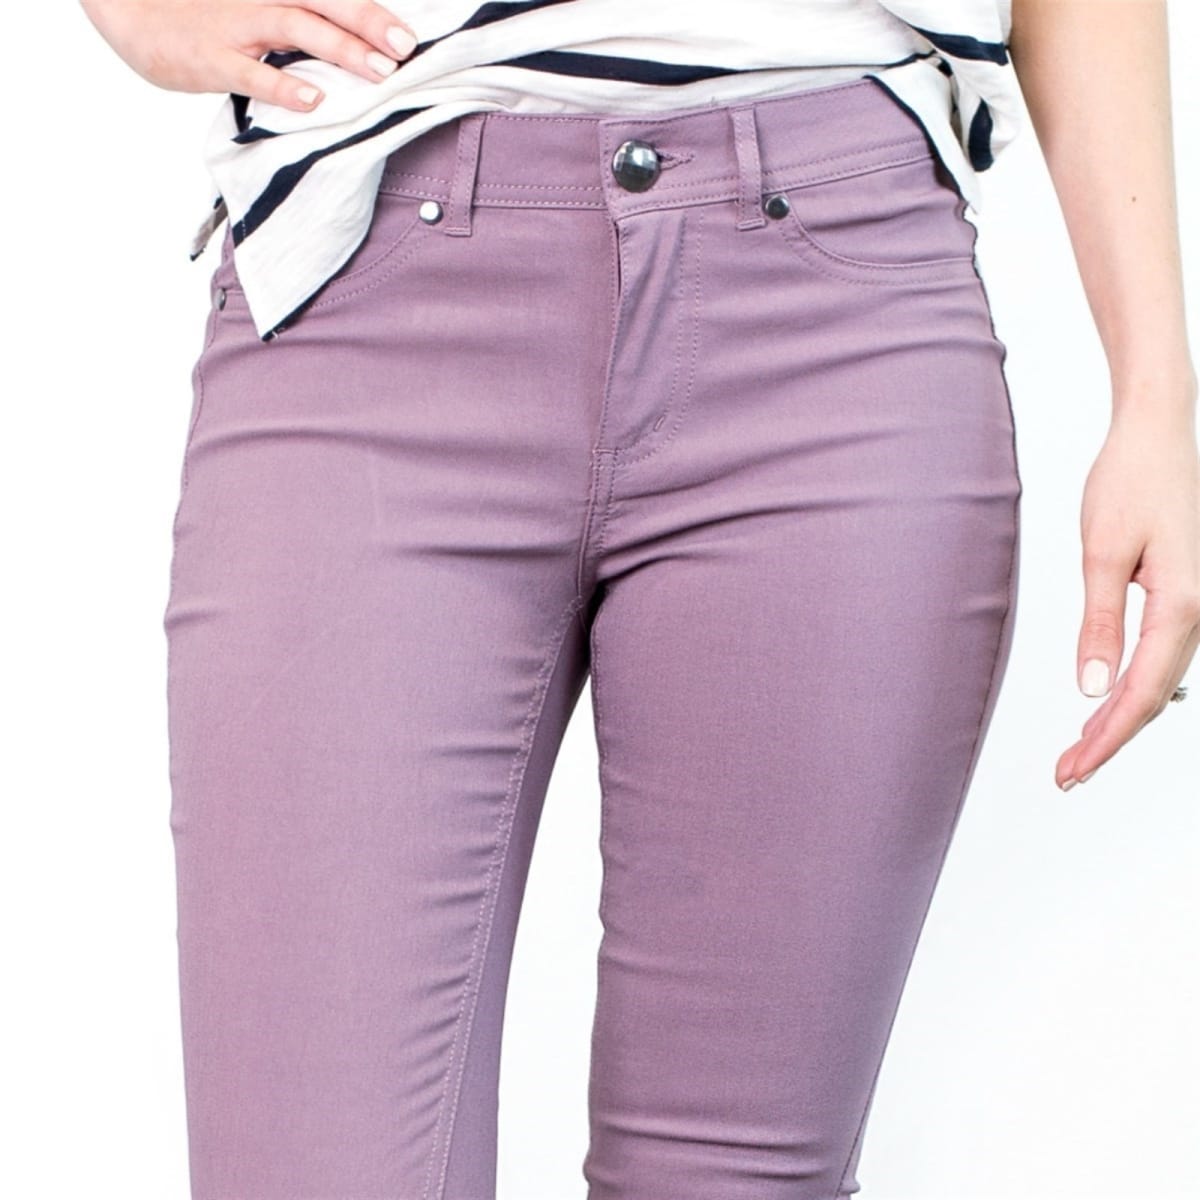 Stretch Colored Pants – Only $15.99!